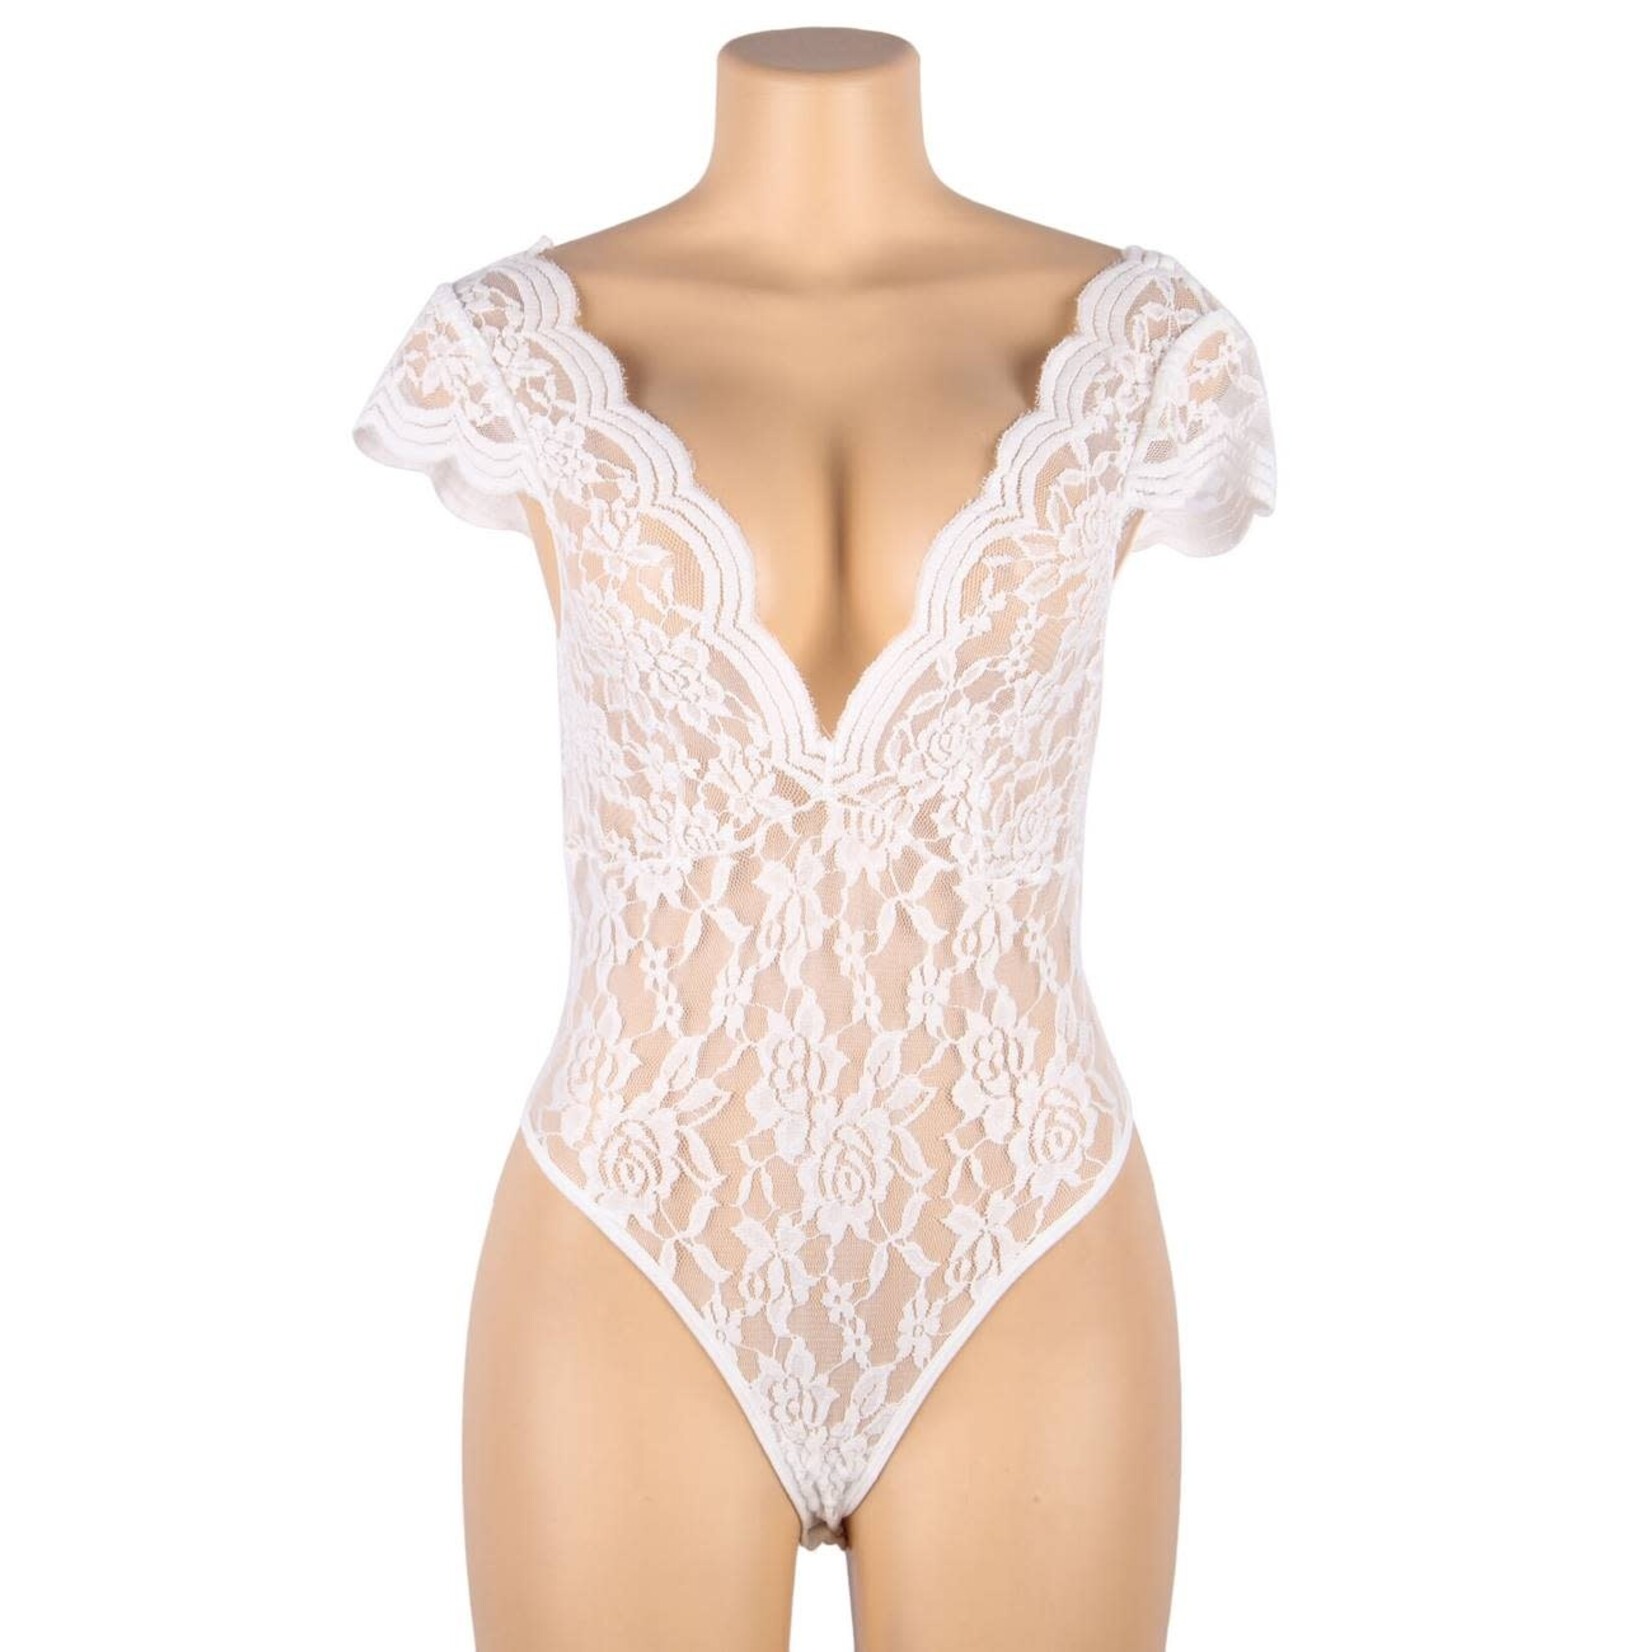 OH YEAH! -  SEXY WHITE DEEP V BACKLESS FULL LACE TEDDY XS-S